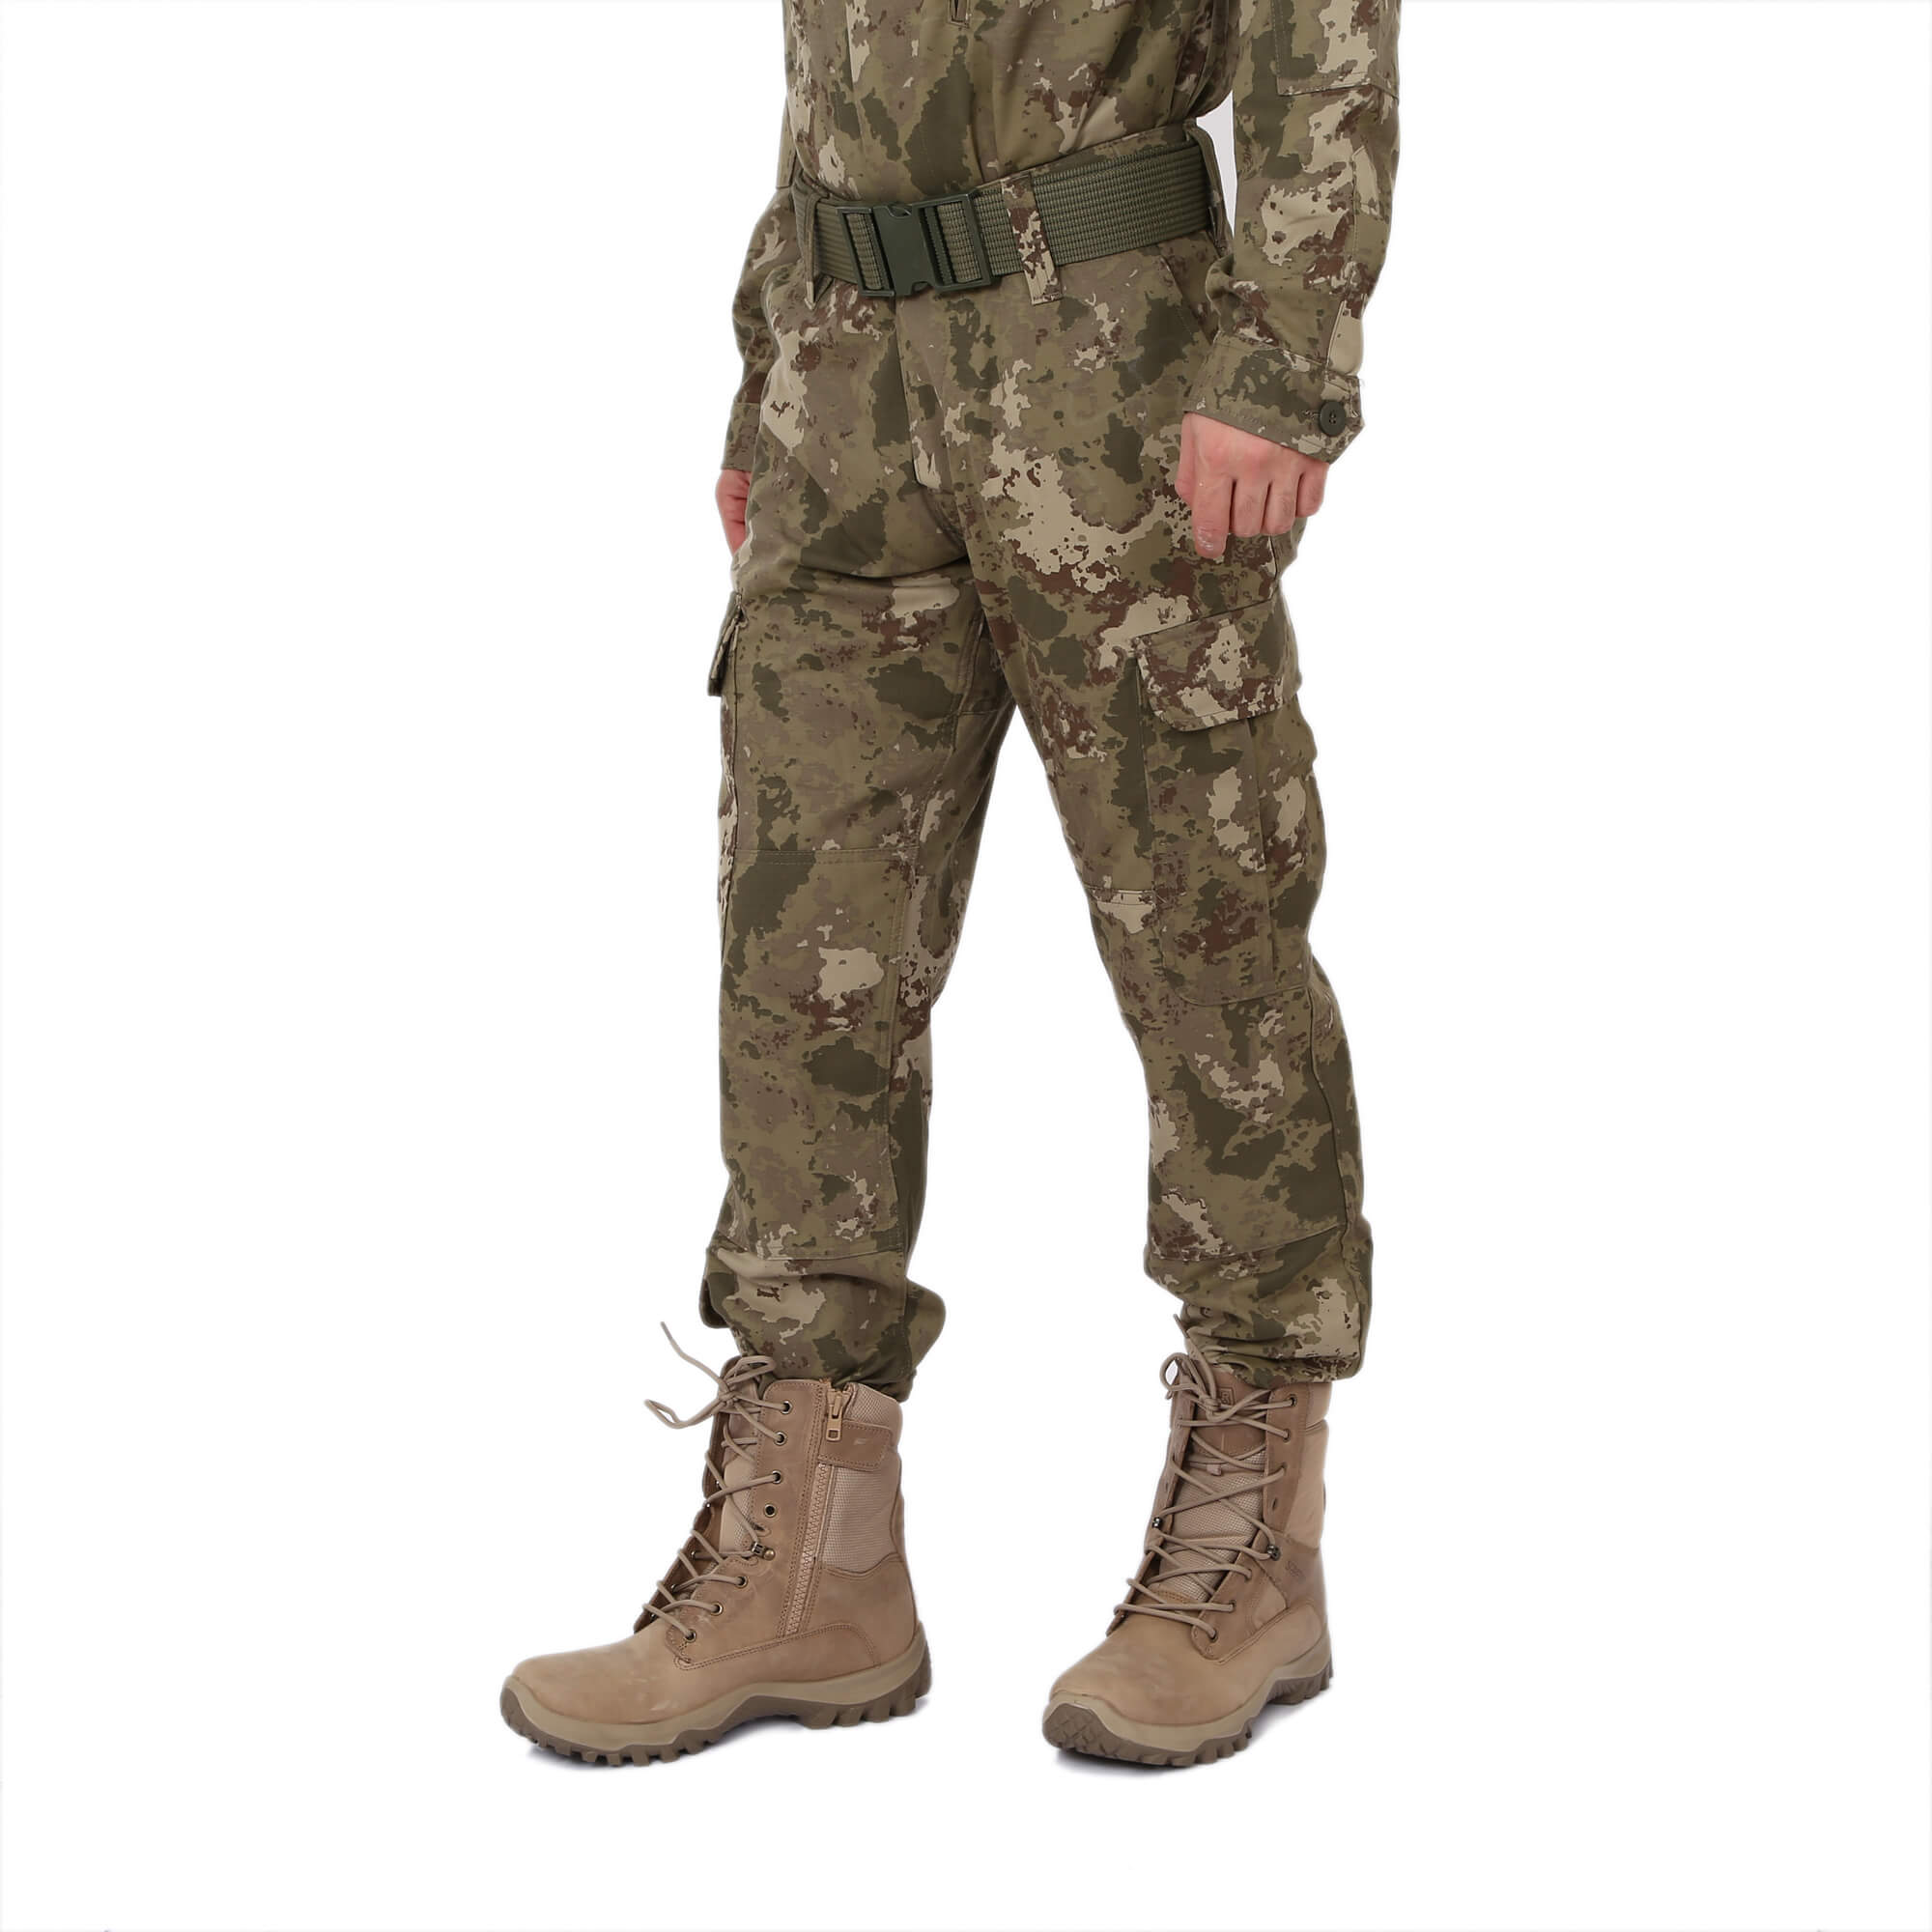 CRW Camouflage Military Tactical Pants